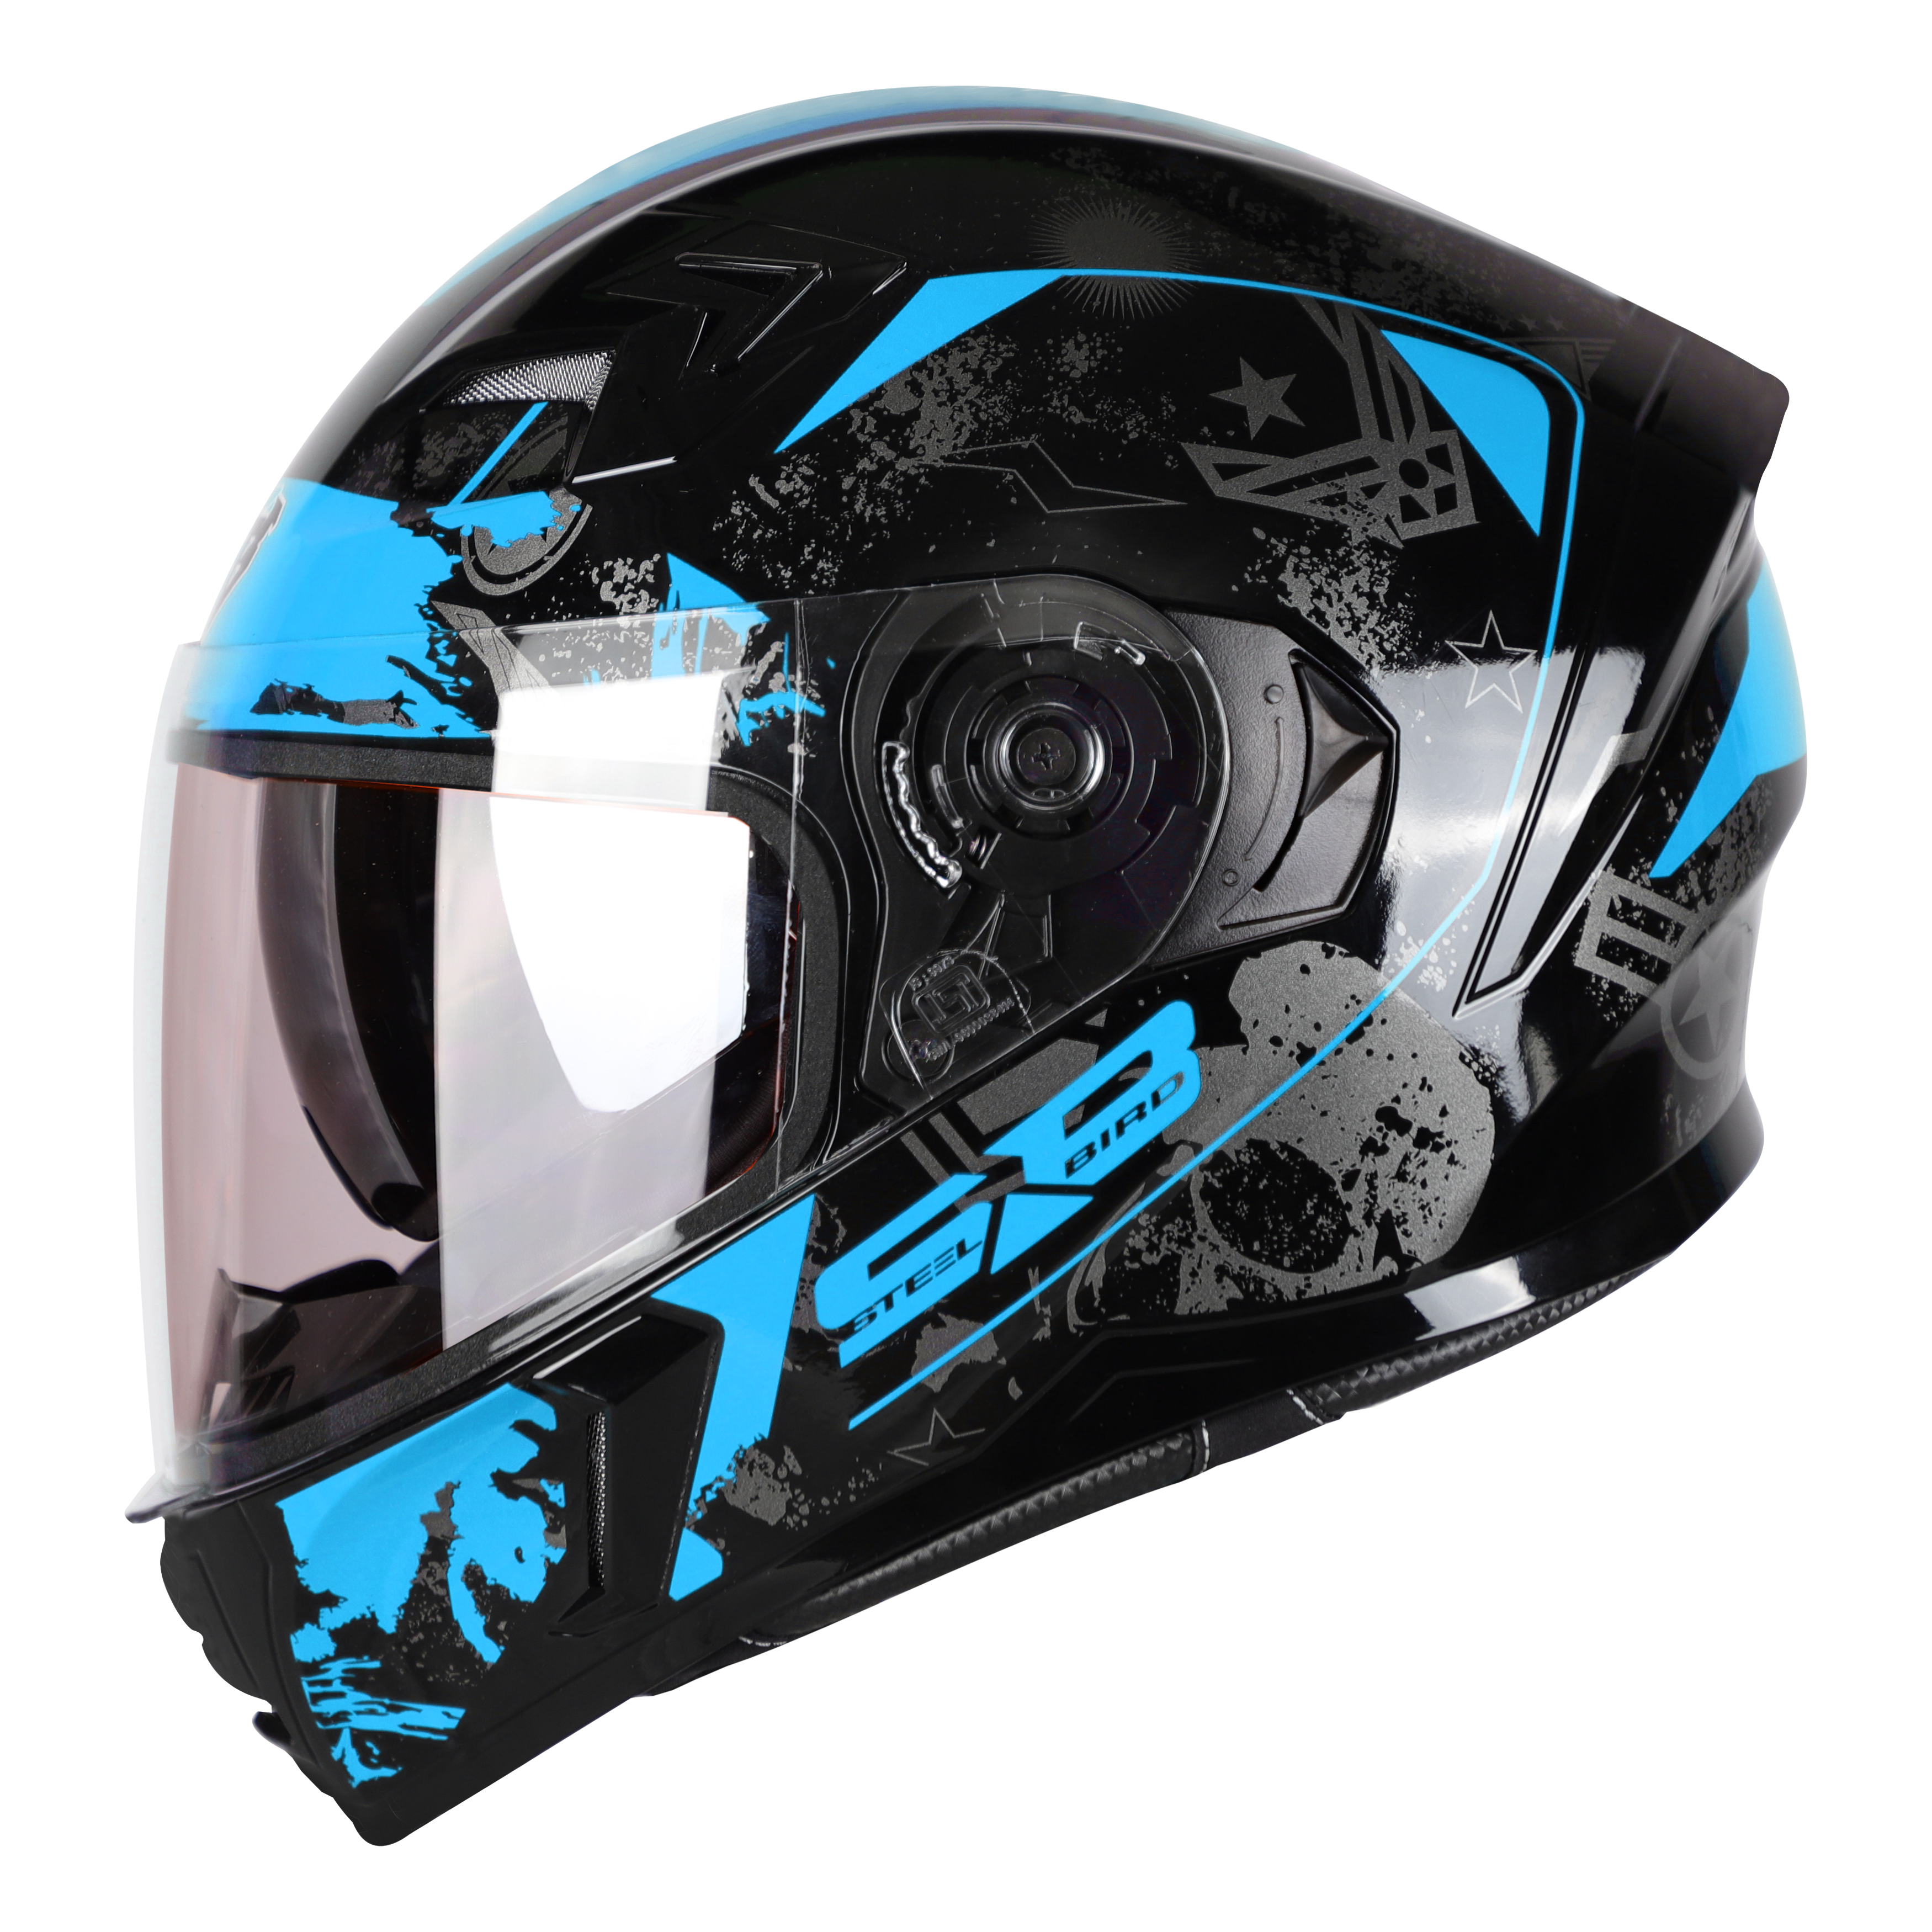 SBA-21 COMBAT GLOSSY BLACK WITH BLUE (WITH IINNER SHIELD & HIGH-END INTERIOR)